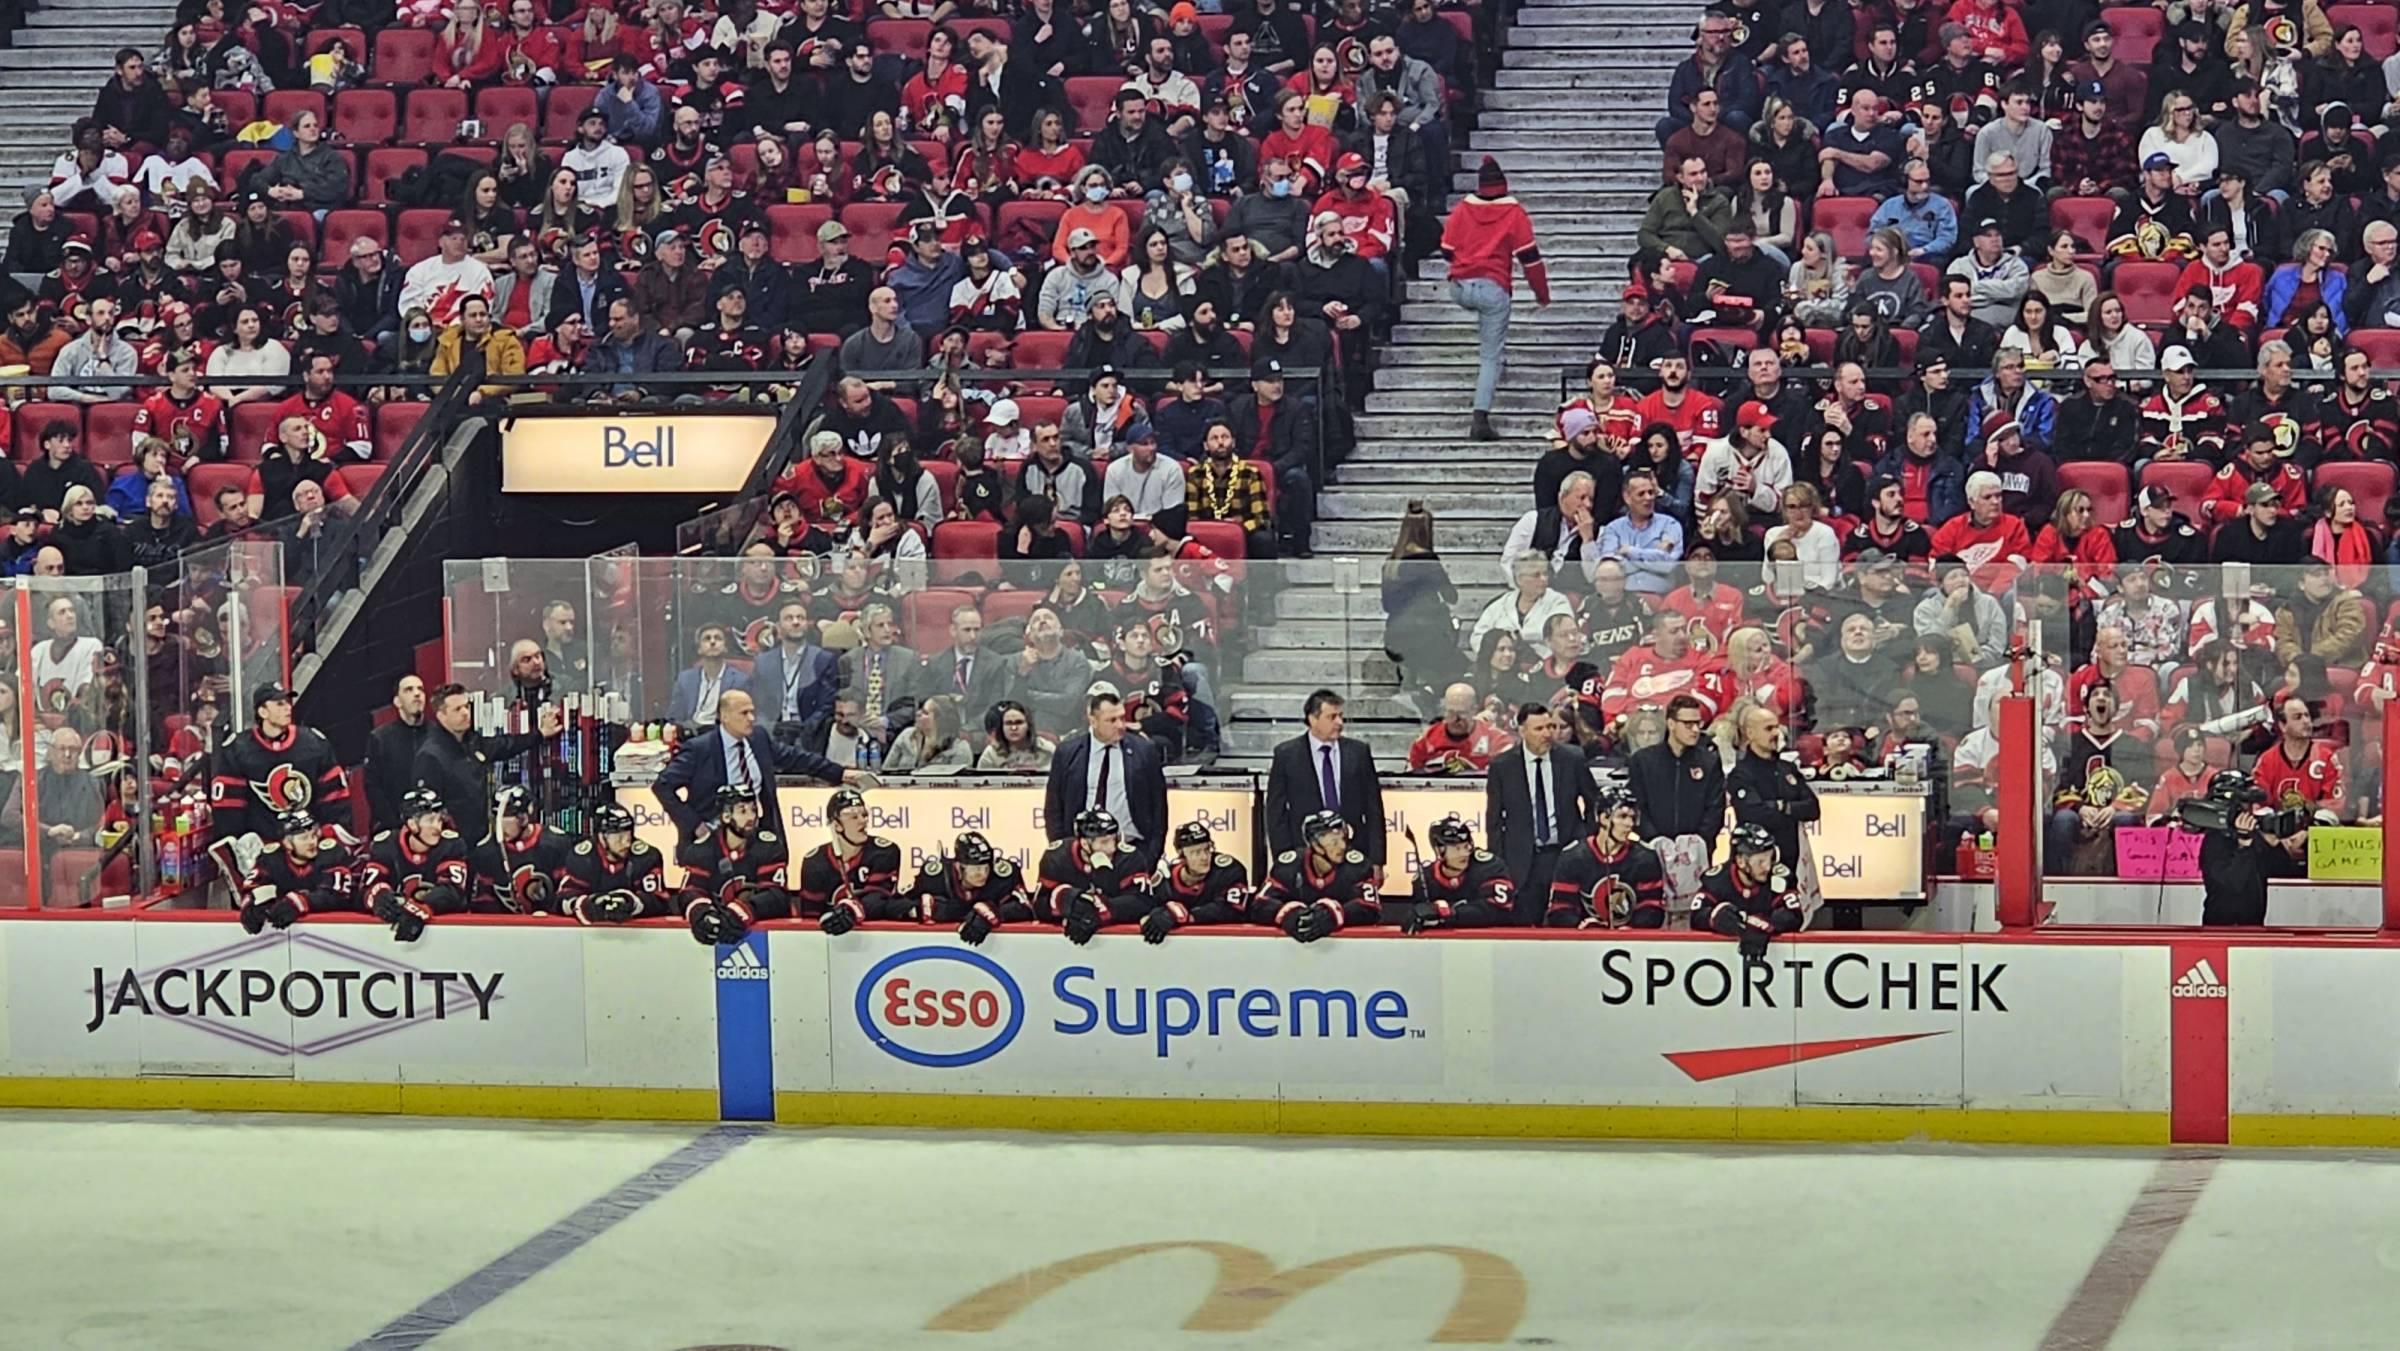 Home Bench at the Canadian Tire Center